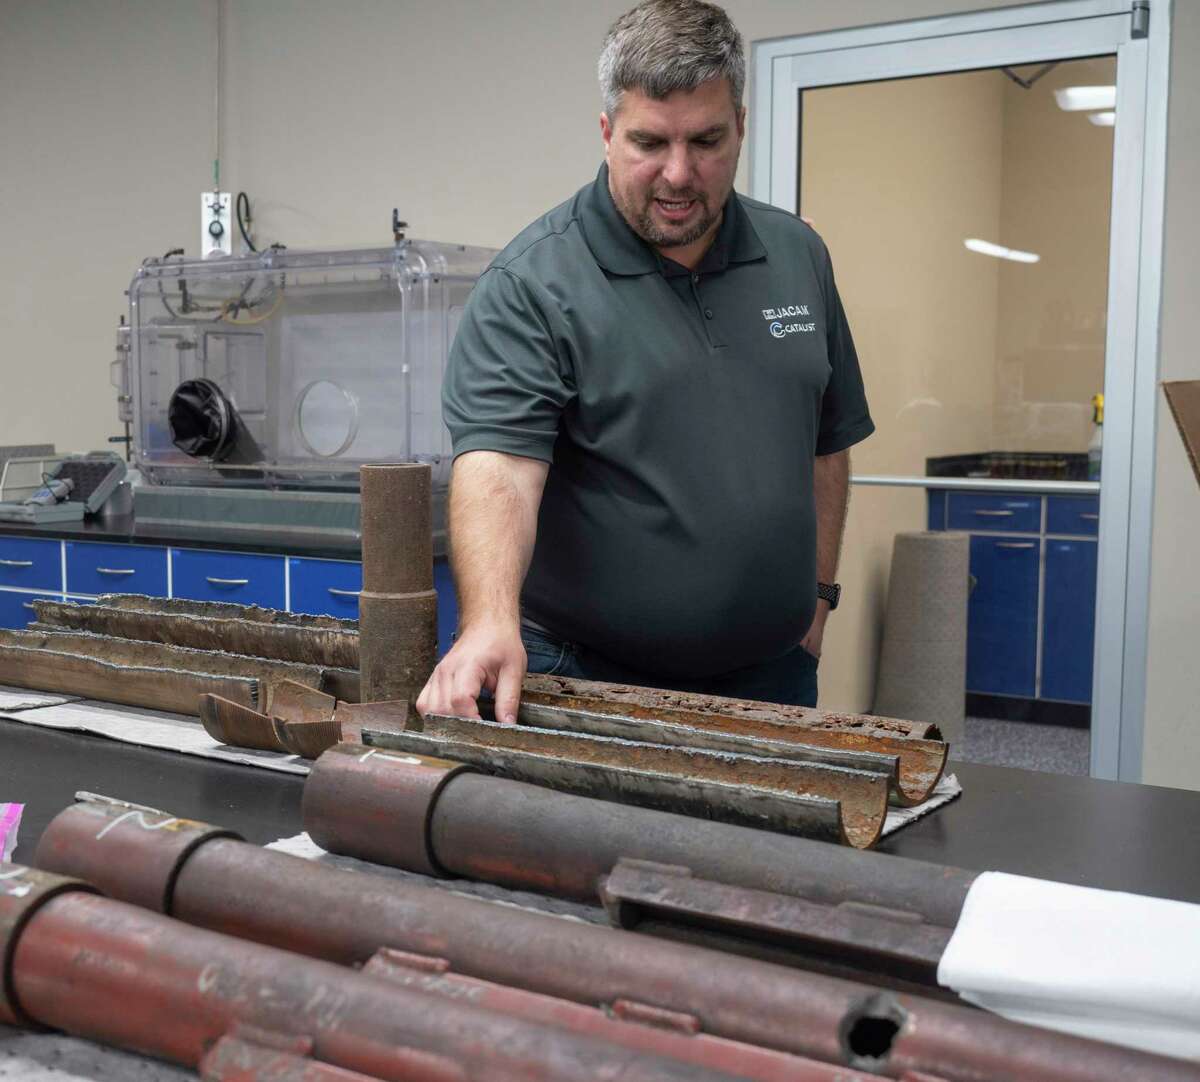 Justin Disney, director of laboratory and r&d services, with Jacam Catalyst, talks about the testing they can do on drilling tubing that has failed. 05/05/2021 Tim Fischer/Reporter-Telegram